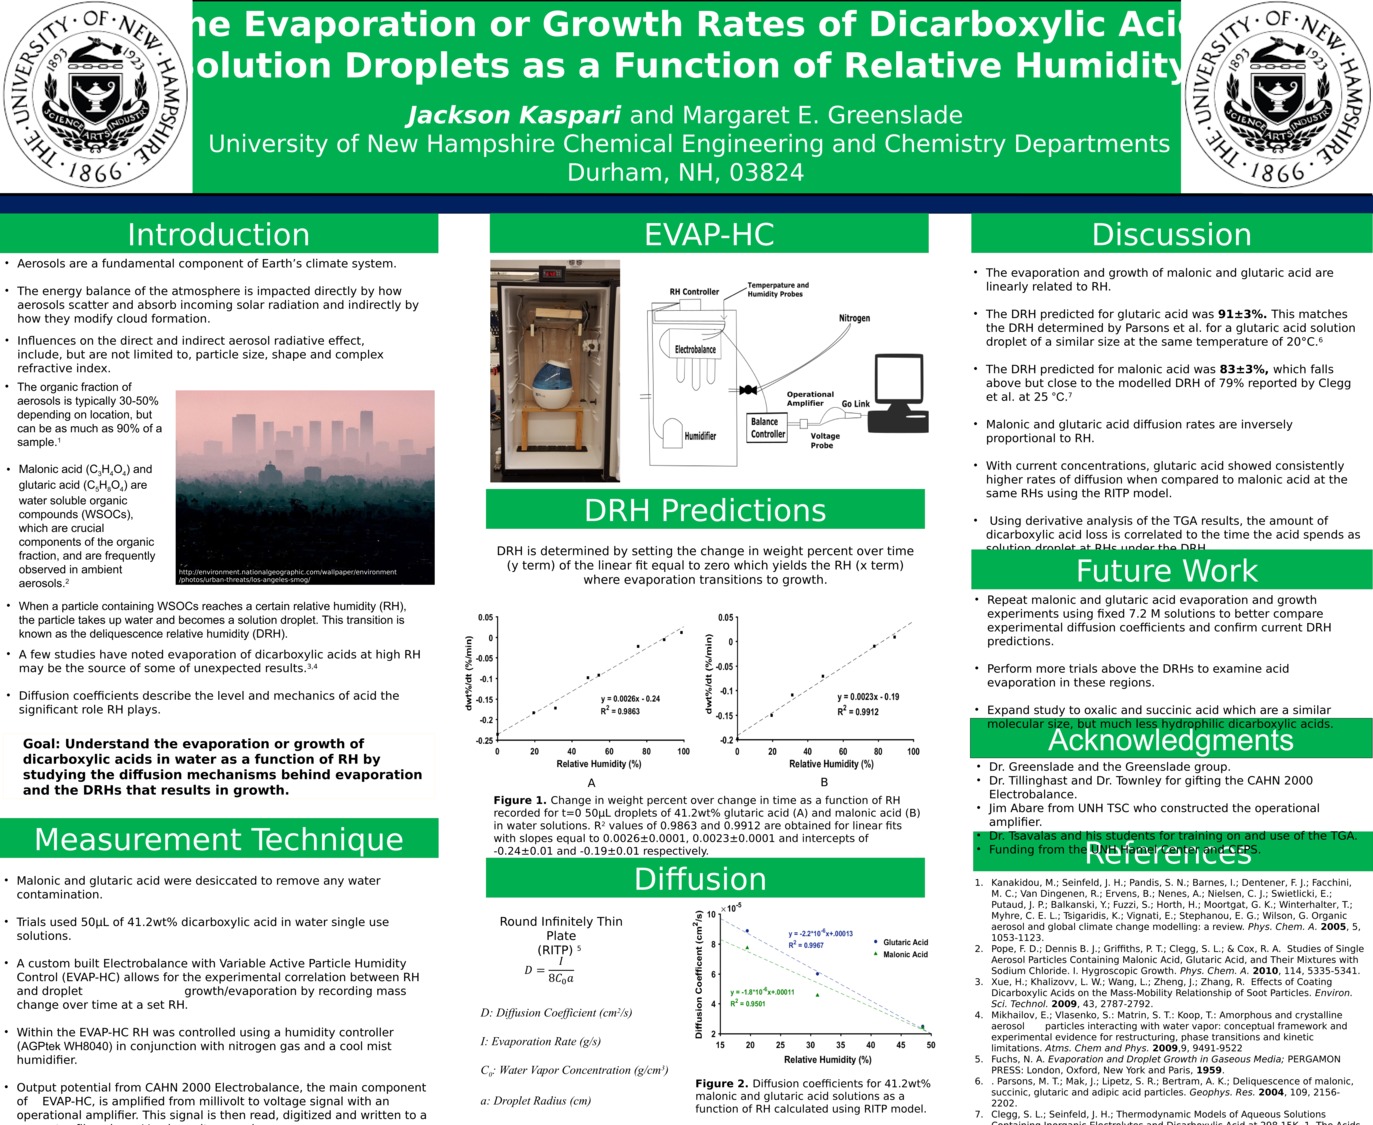 The Evaporation Or Growth Rates Of Dicarboxylic Acid Solution Droplets As A Function Of Relative Humidity by jhk2000